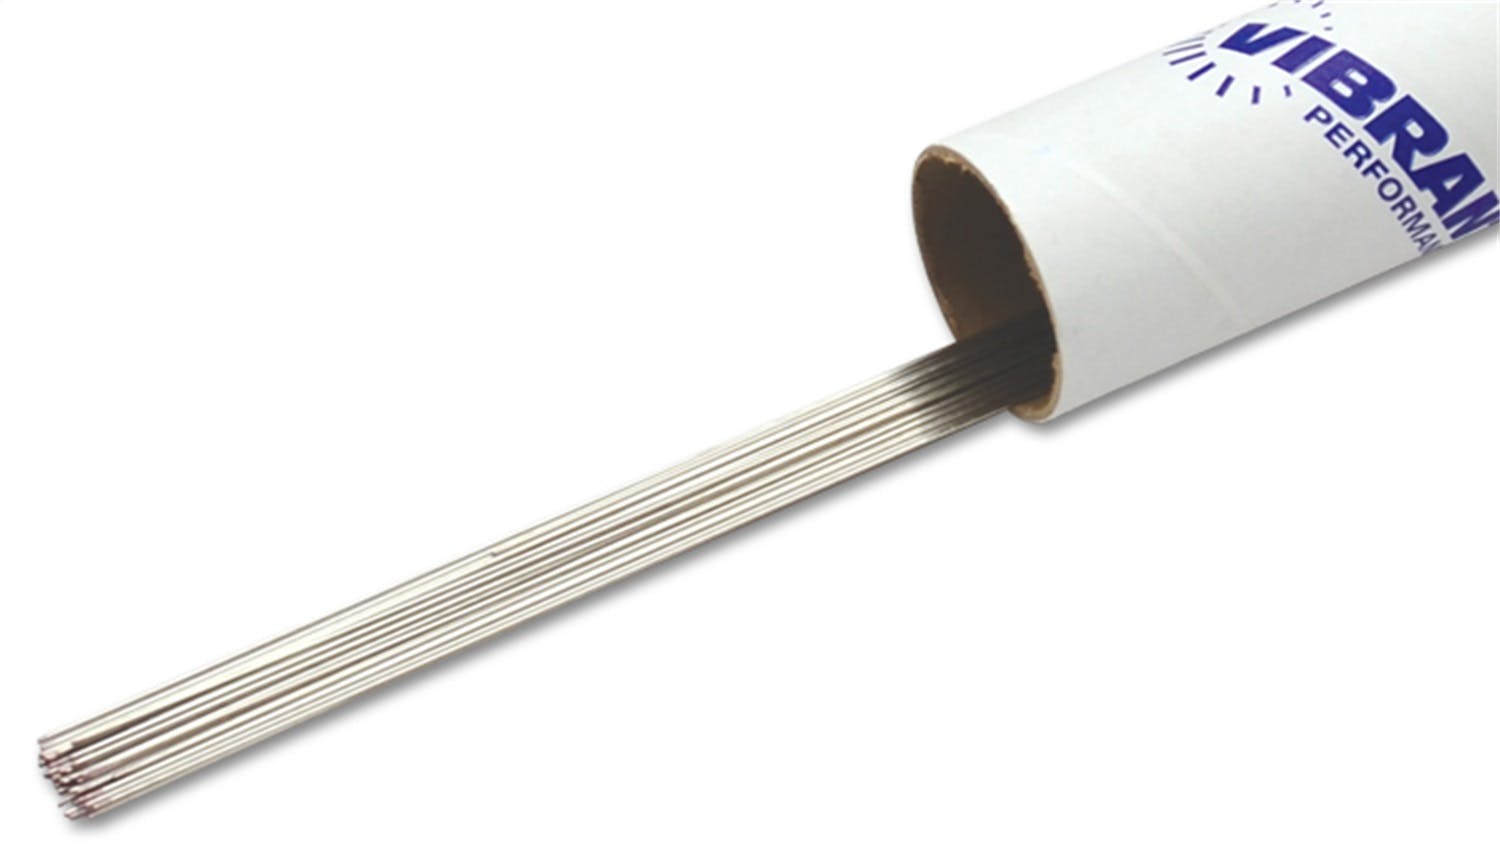 Vibrant Performance 29241 Wire Stainless Steel ER309L - 0.045 inch Thick (1.2mm) - 39.5 inch Long Rod - 1lb box